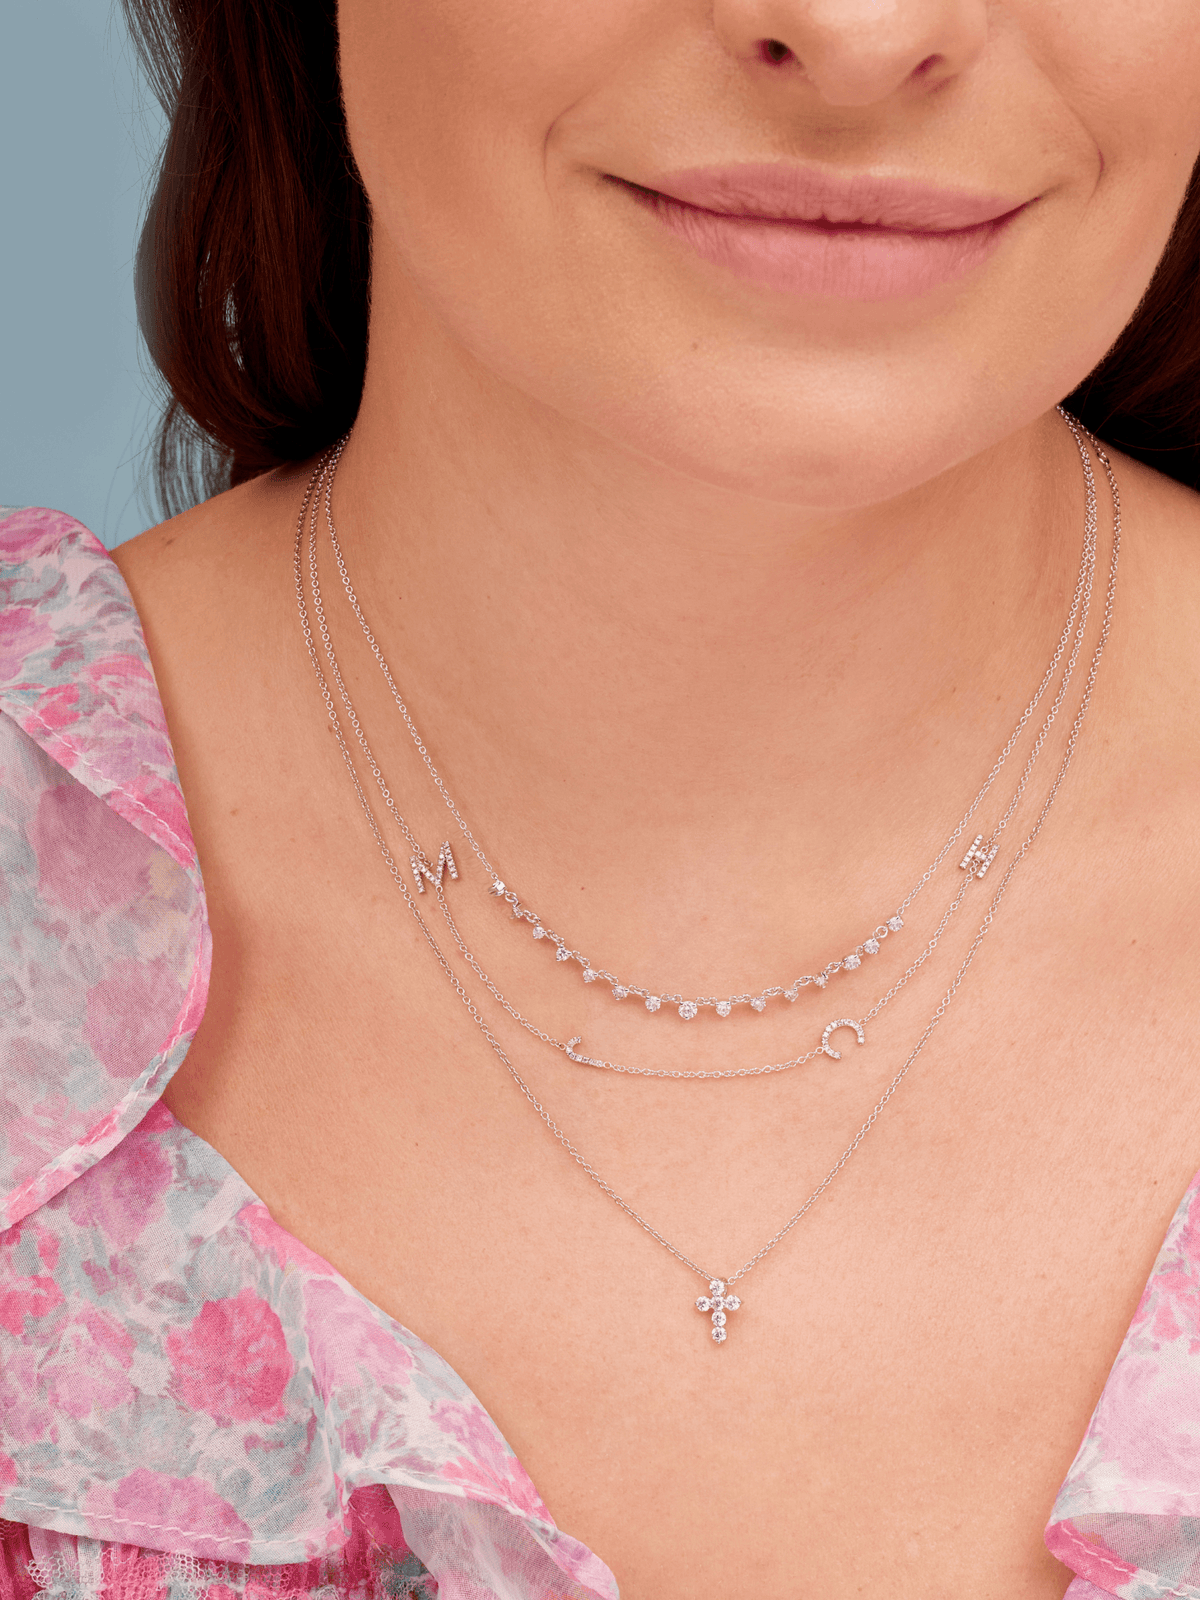 White Gold 4 Diamond Initial Necklace Layered on Neck with Diamond Cross Necklace and Graduated Diamond Chain Necklace